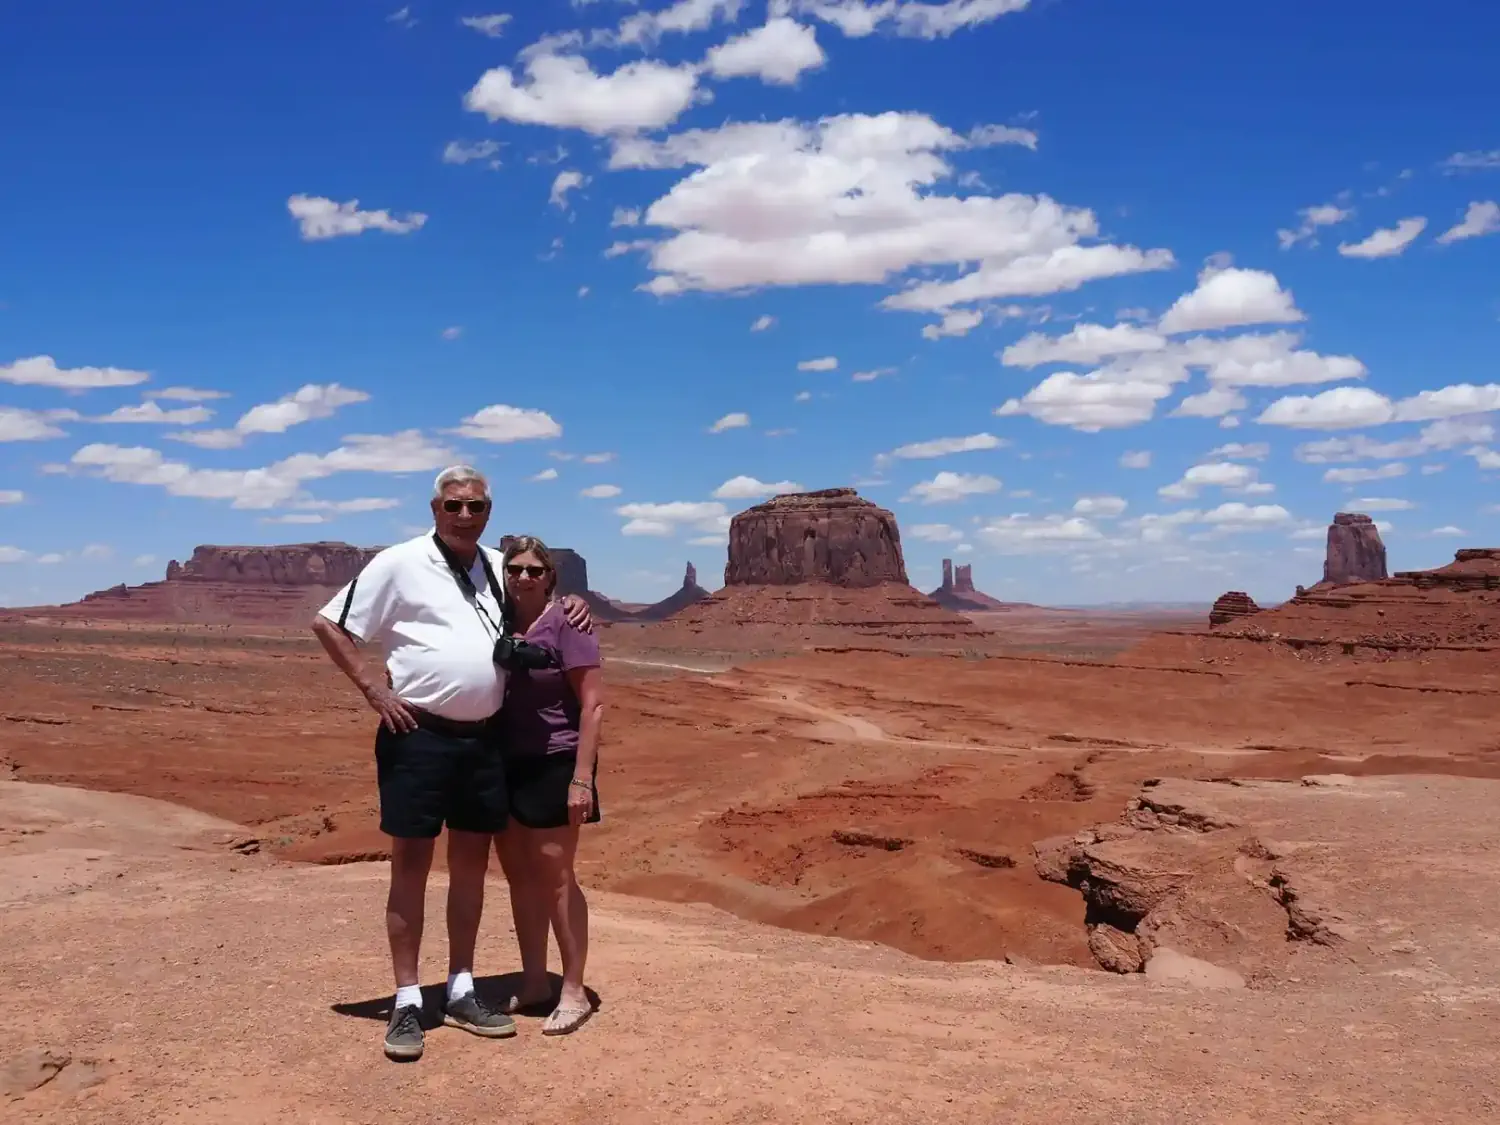 Marilyn and John posing for a photo at Monument Valley